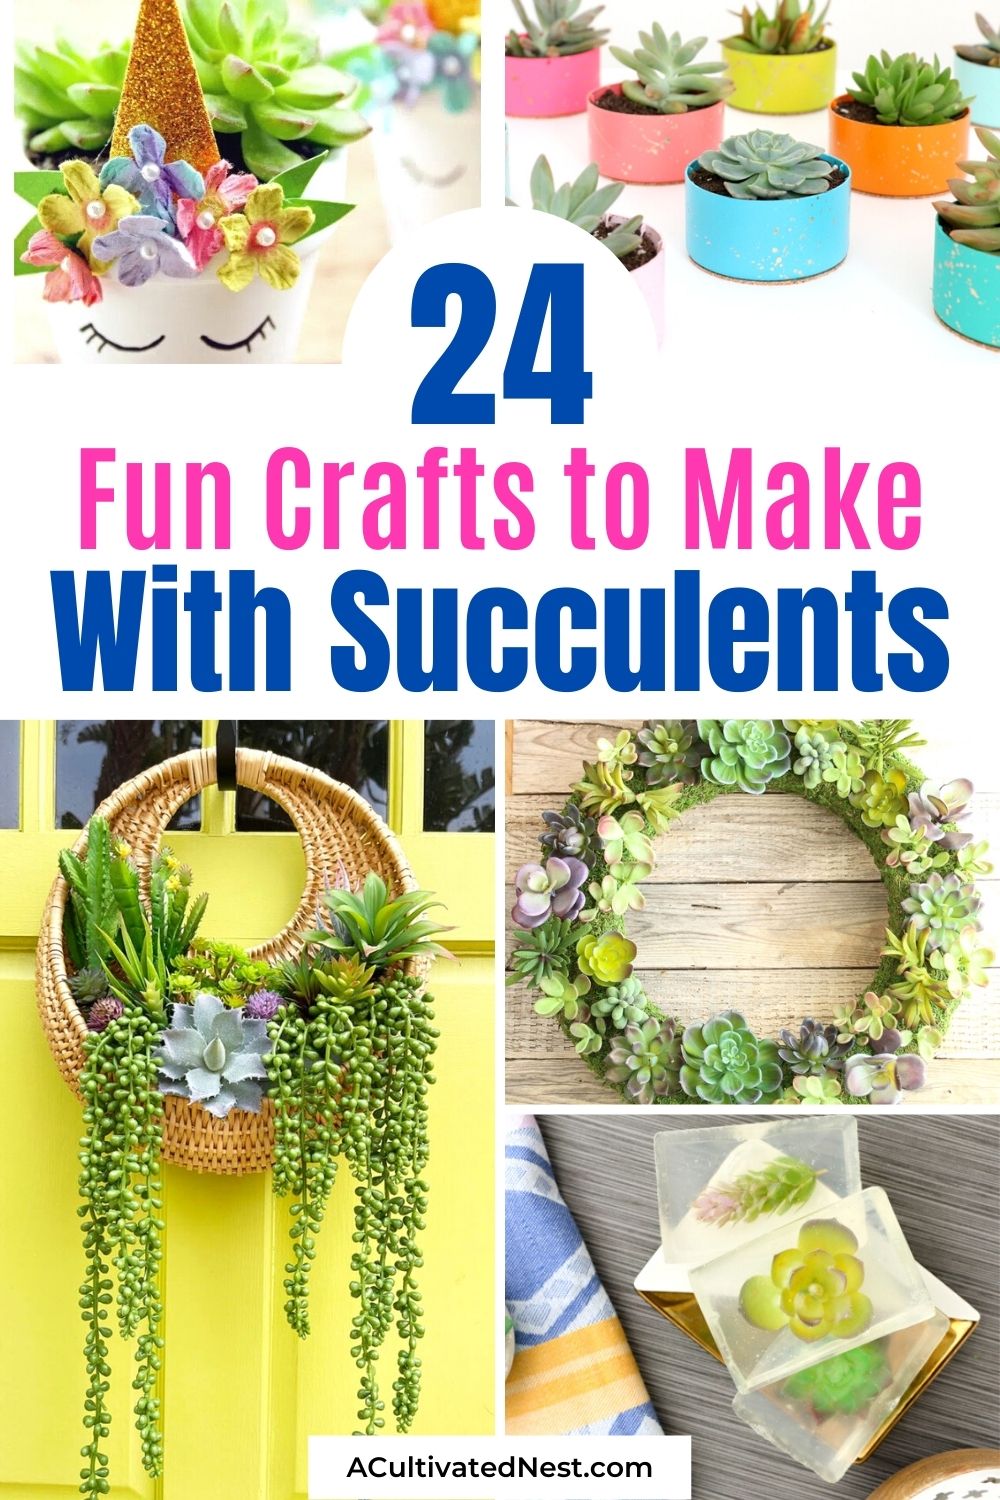 24 Fun Succulent Crafts- If you want to add some natural touches to your space, then you need to try these fun succulent crafts! They're easy to make! | #succulents #crafts #diyProjects #diy #ACultivatedNest